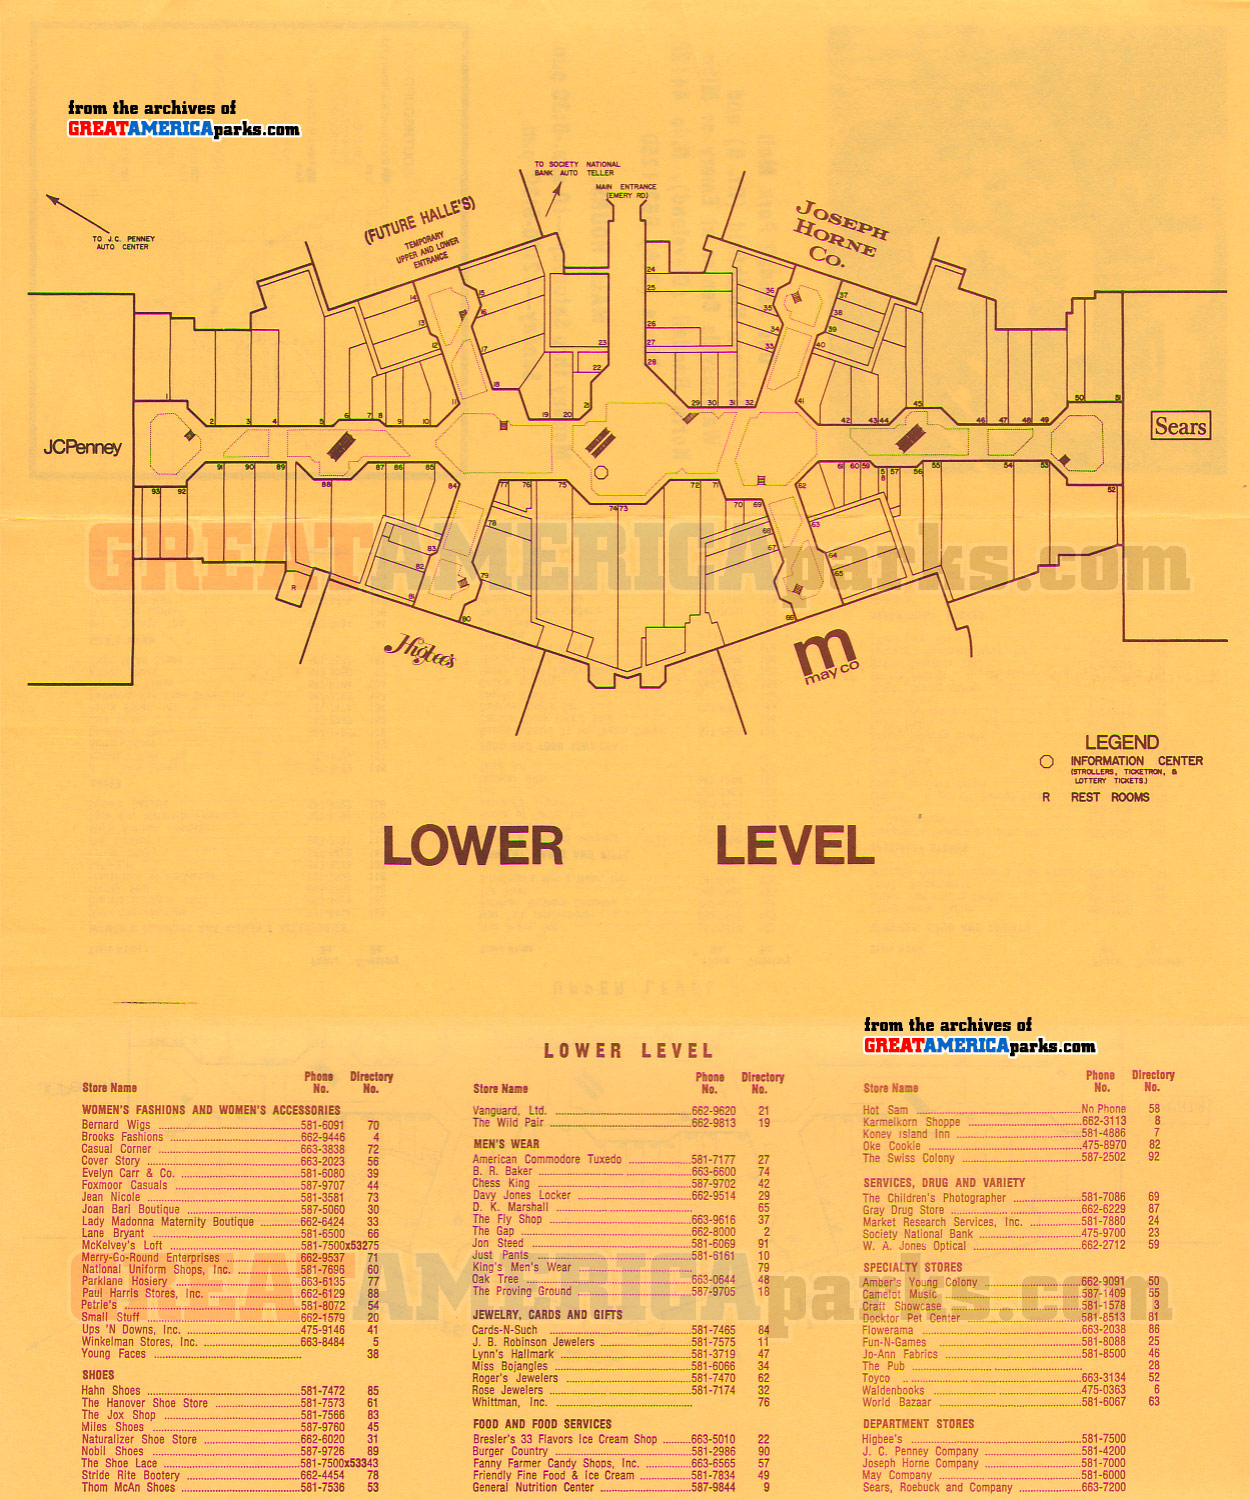 3. Randall Park Mall directory, lower level
1977 Randall Park Mall directory
